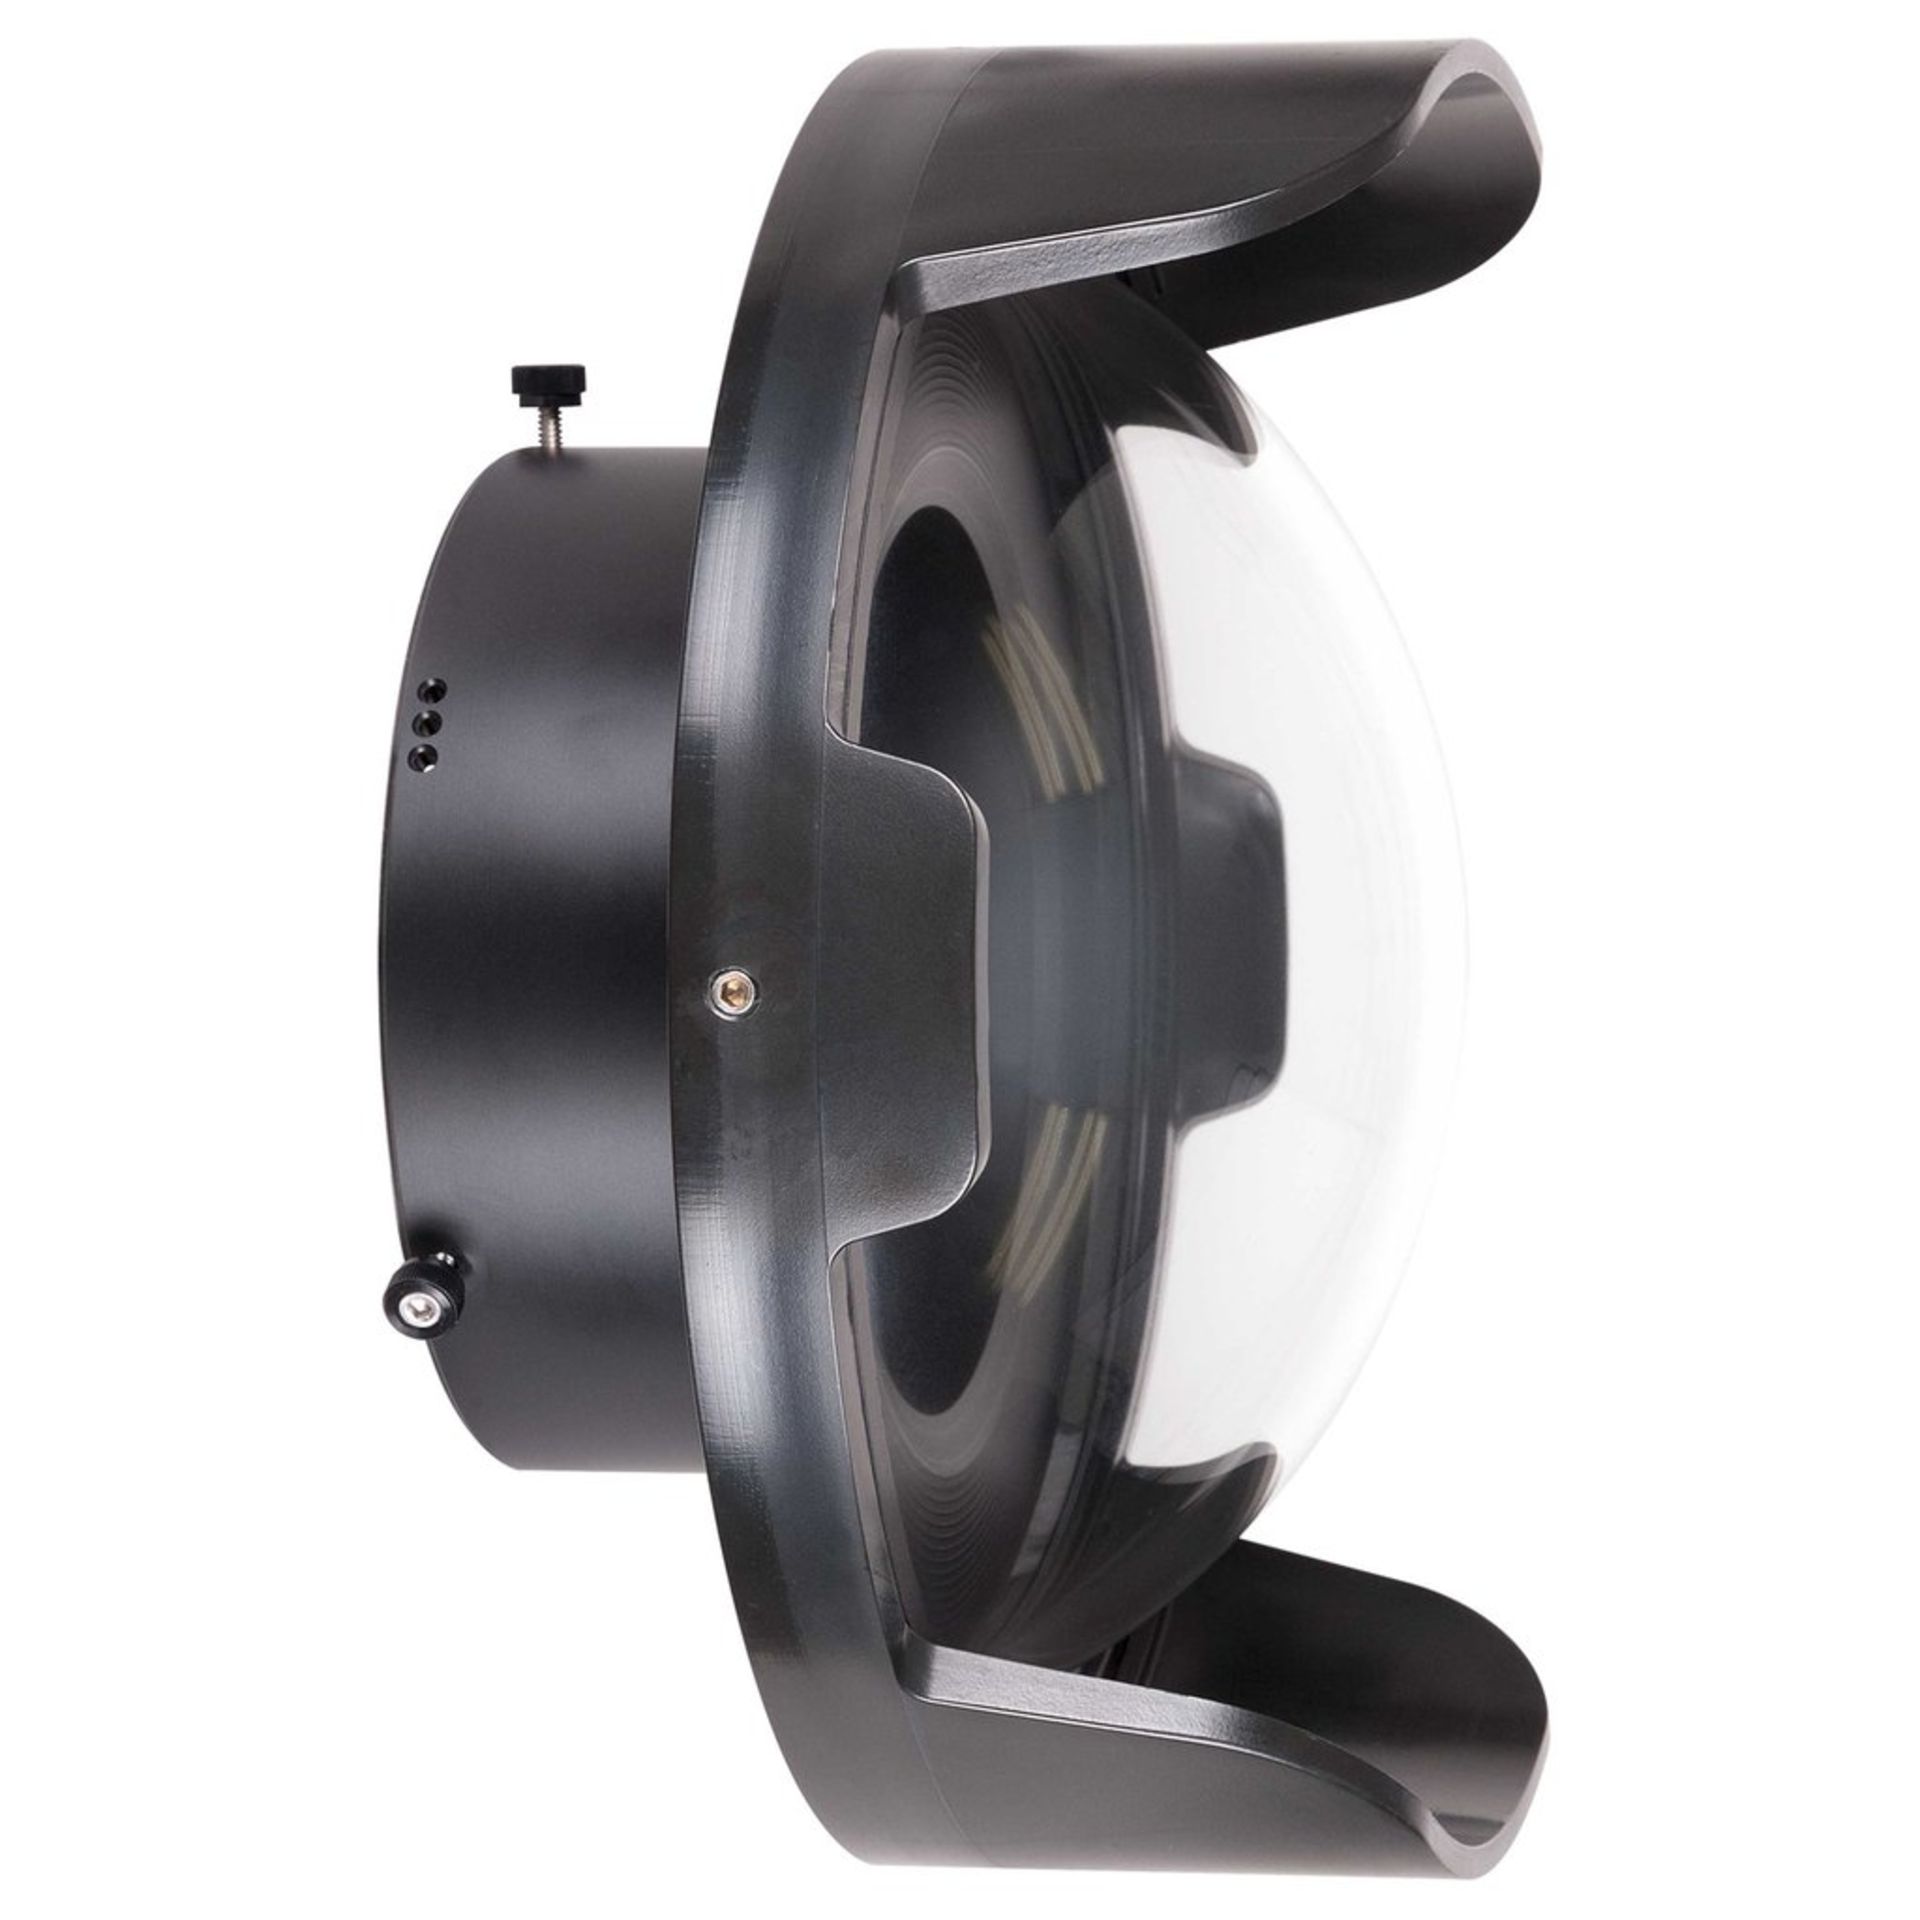 IKELITE DL 8 inch Dome Port Product 75340